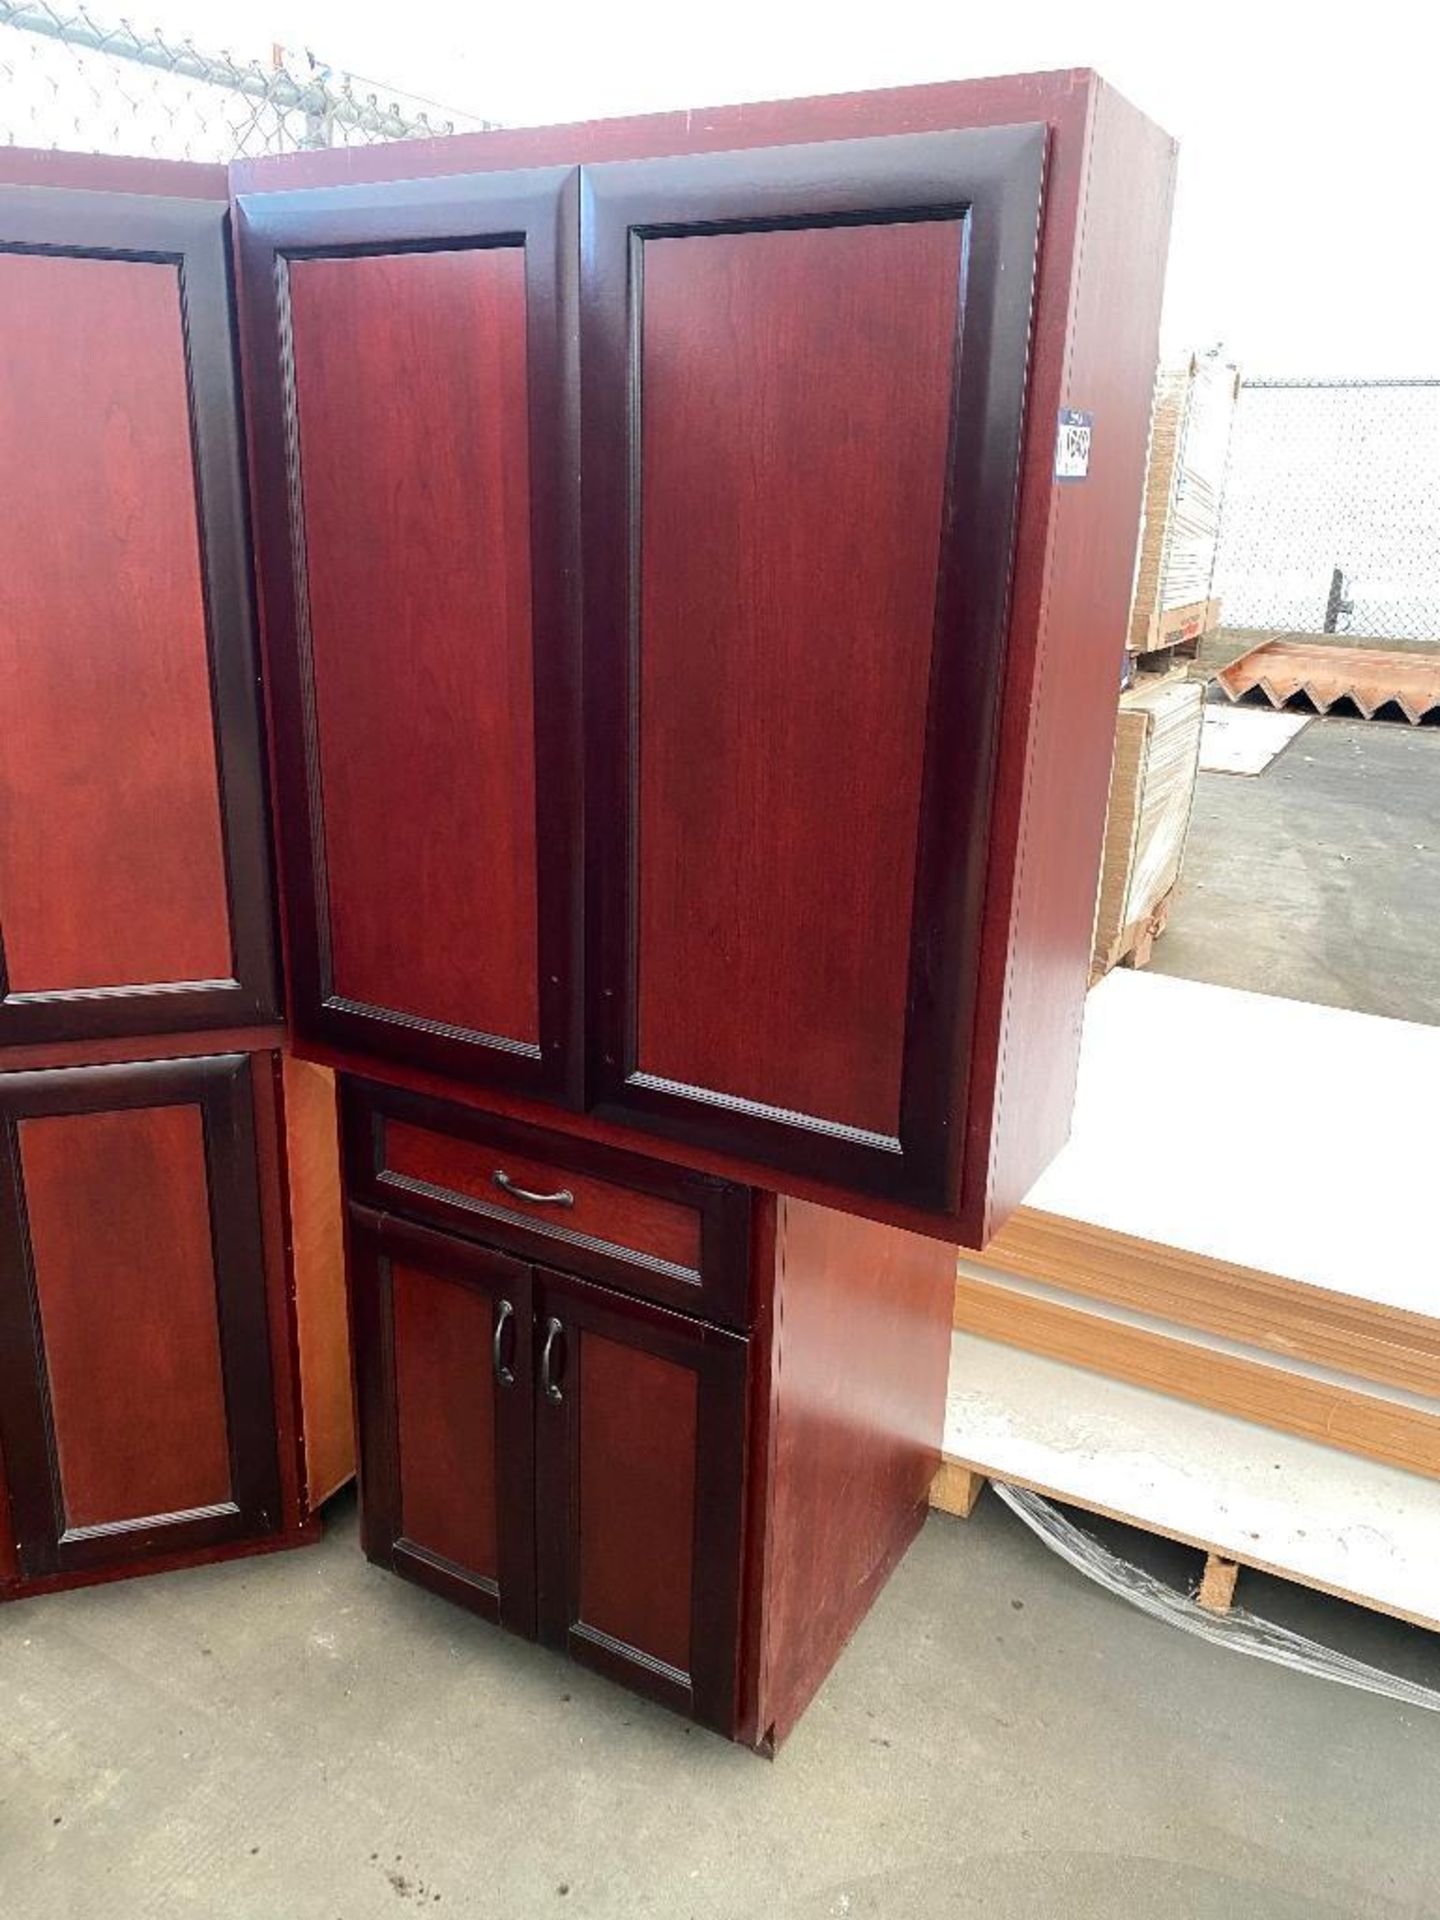 Lot of Asst. Kitchen Cabinets - Image 2 of 4